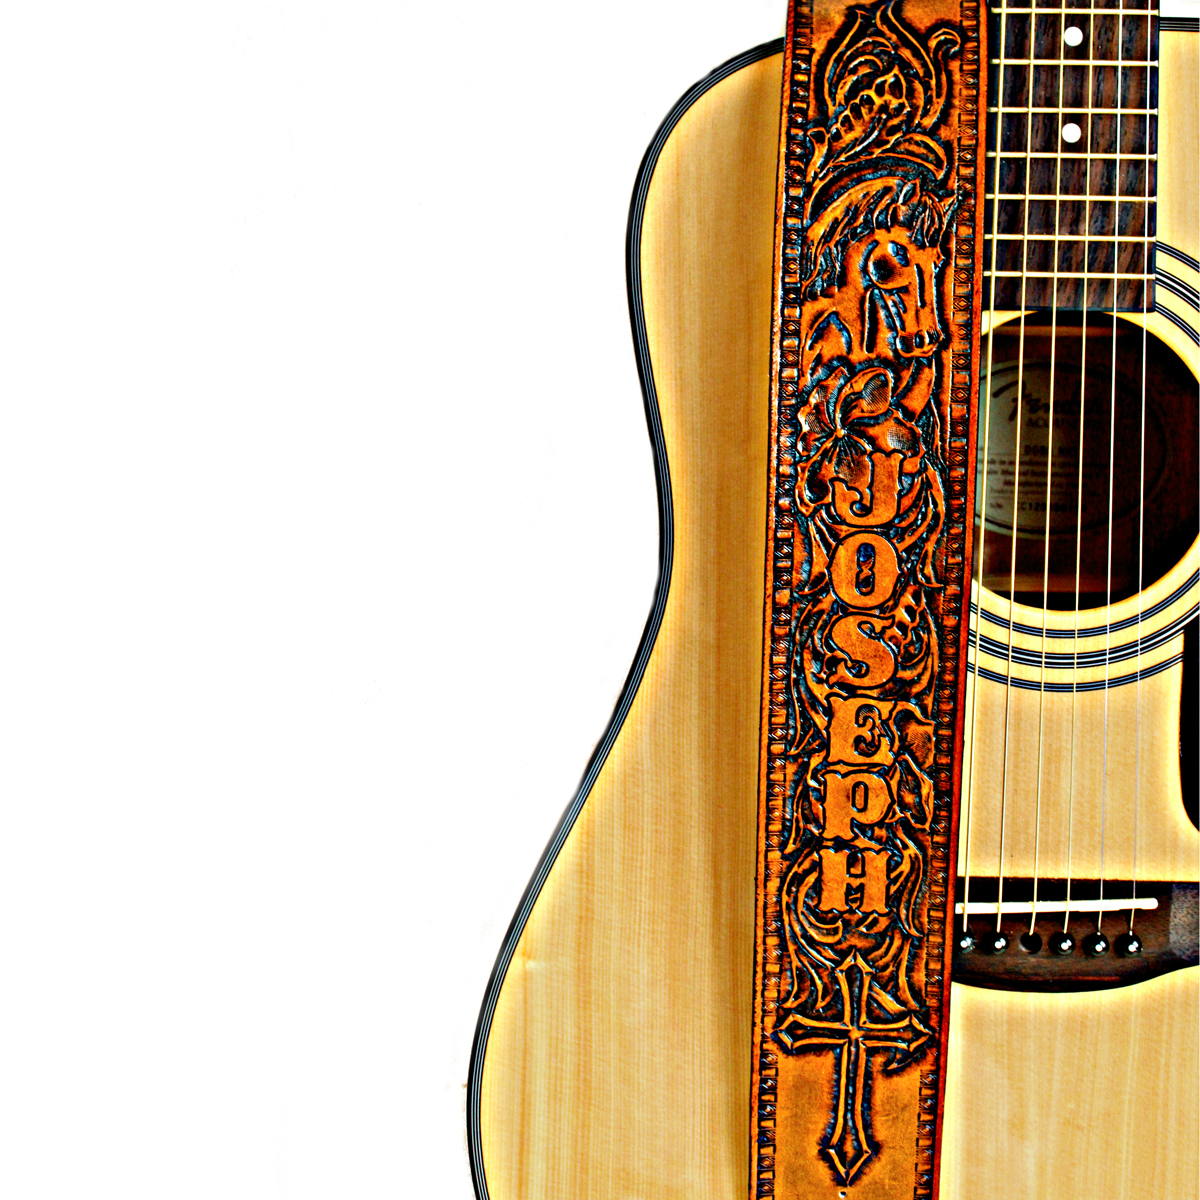 Custom Leather Guitar Straps - Personalized Guitar Straps